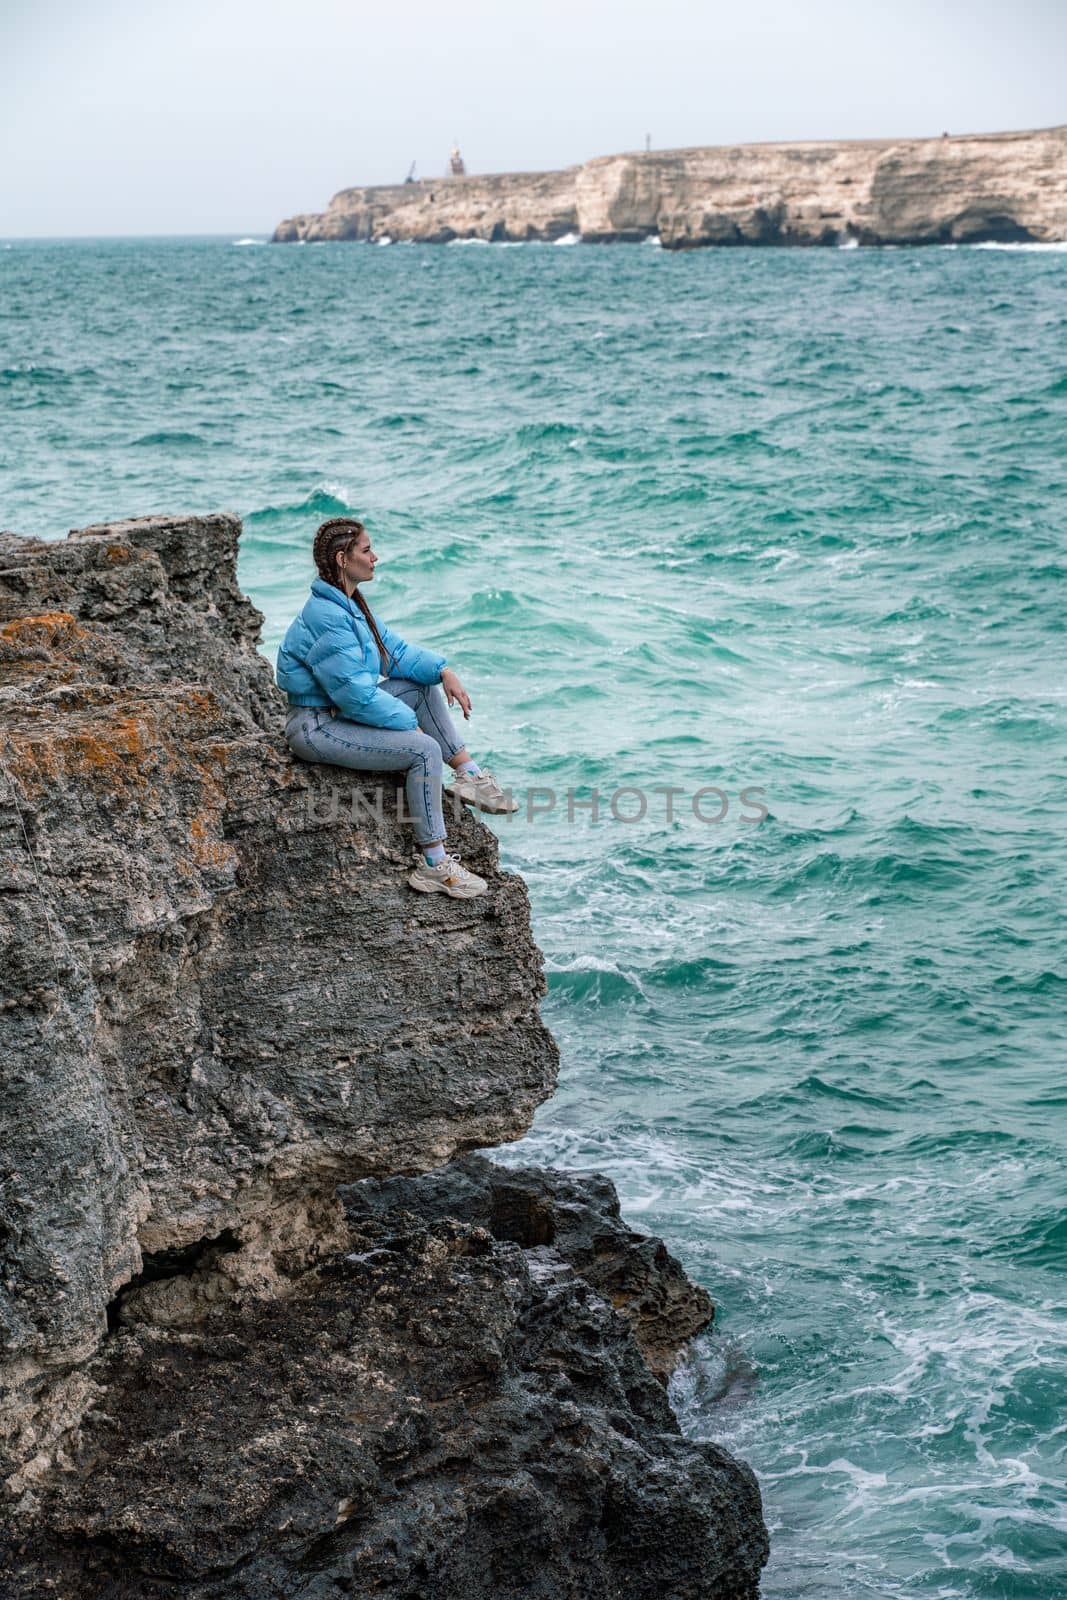 Woman rocks sea. A woman in a blue jacket sits on a rock above a rock above the sea and looks at the raging ocean. Girl traveler rests, thinks, dreams, enjoys nature